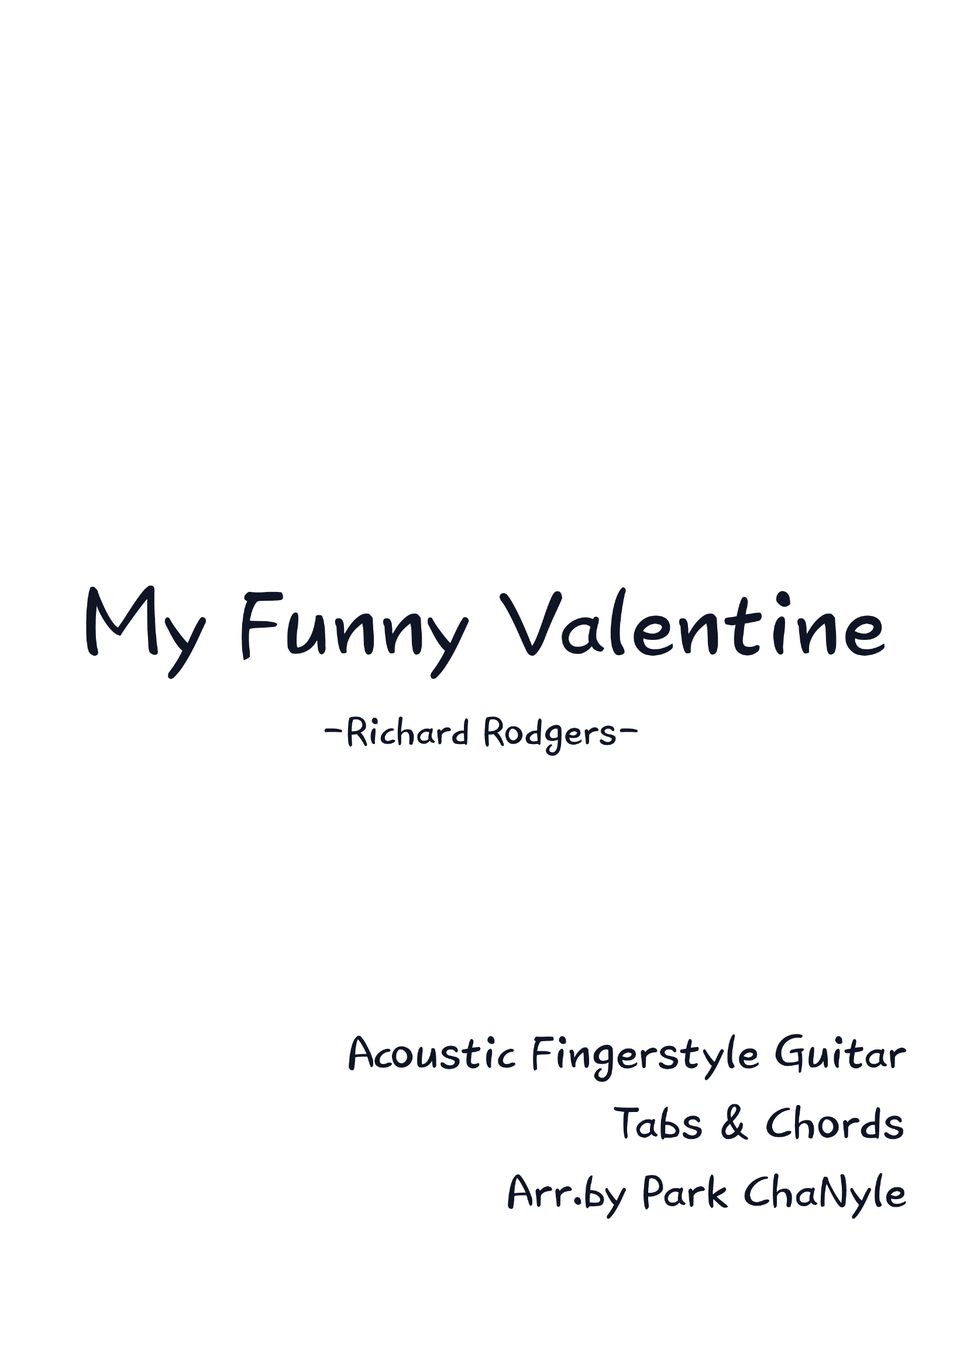 Richard Rodgers - My Funny Valentine (Jazz Fingerstyle Guitar /Jazz Chord Melody) by Park ChaNyle